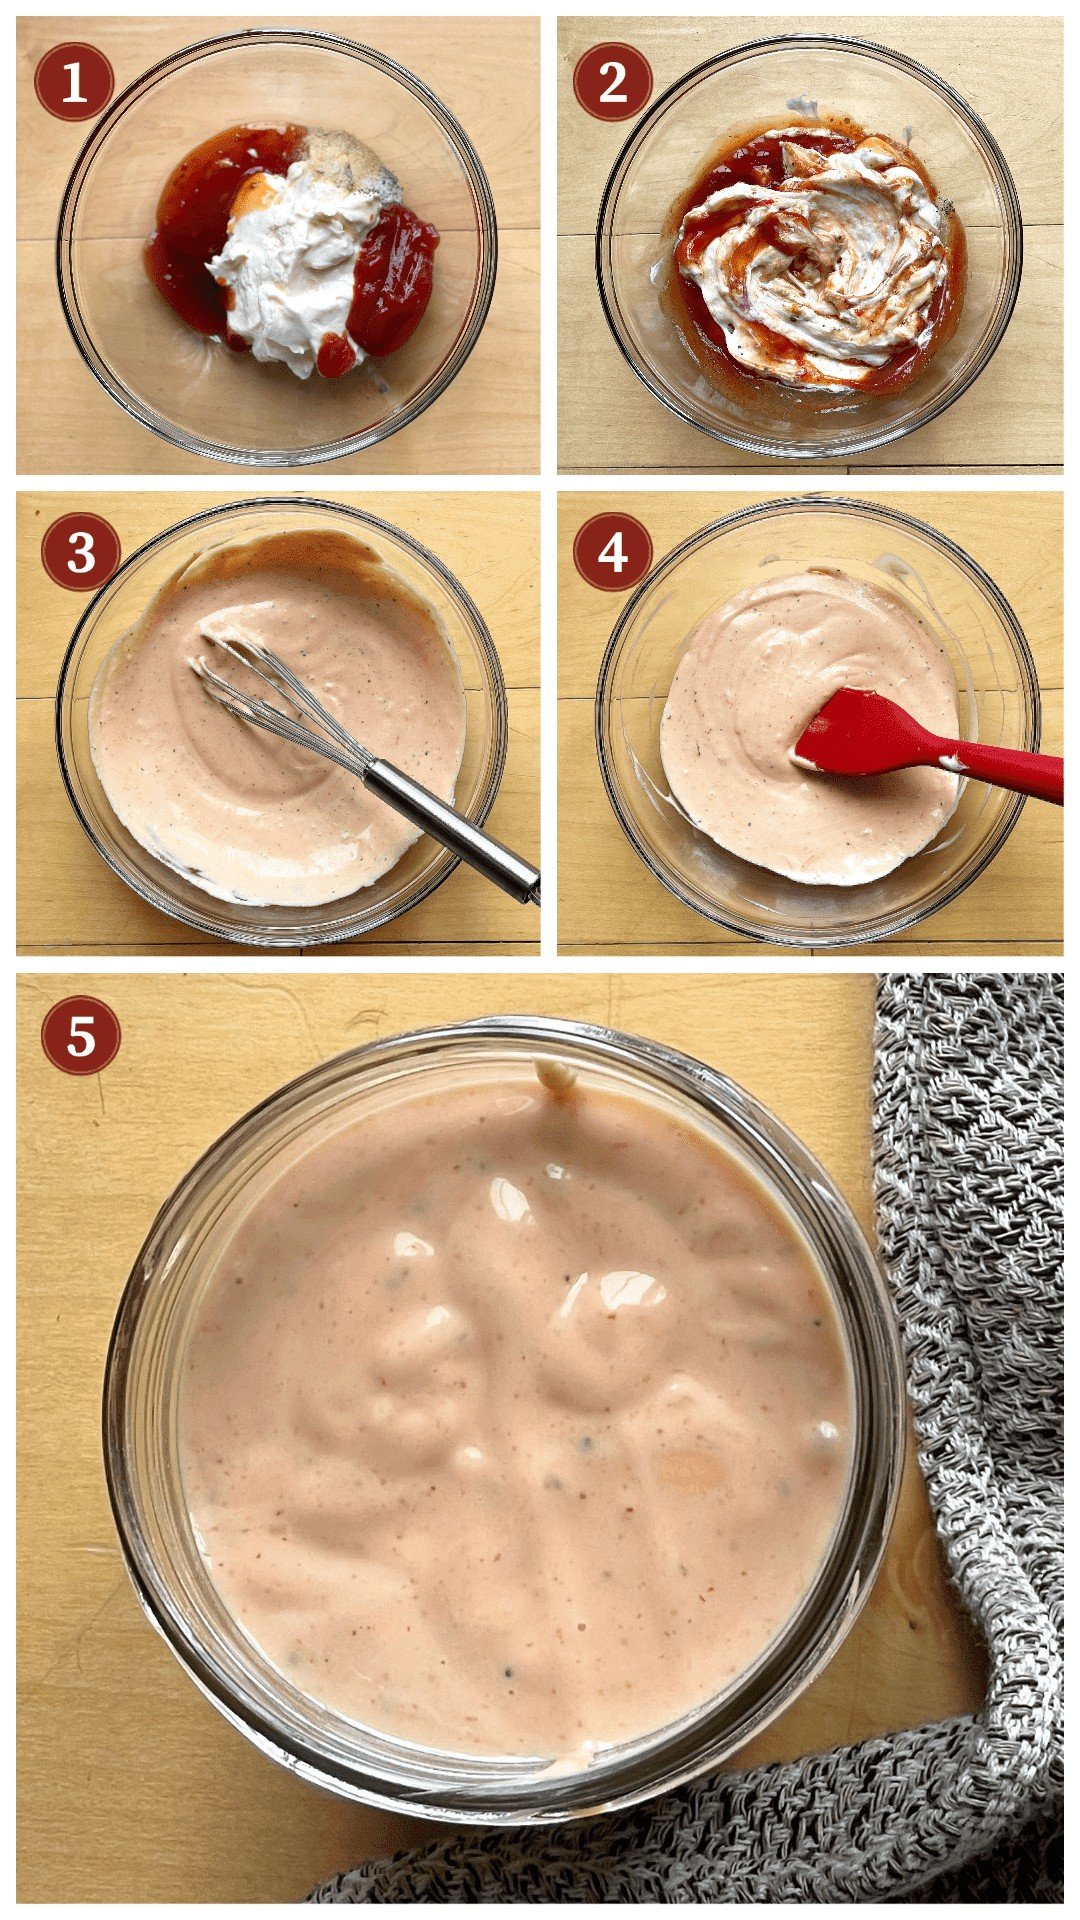 A collage of images showing how to mix up boom boom sauce, steps 1 - 5.